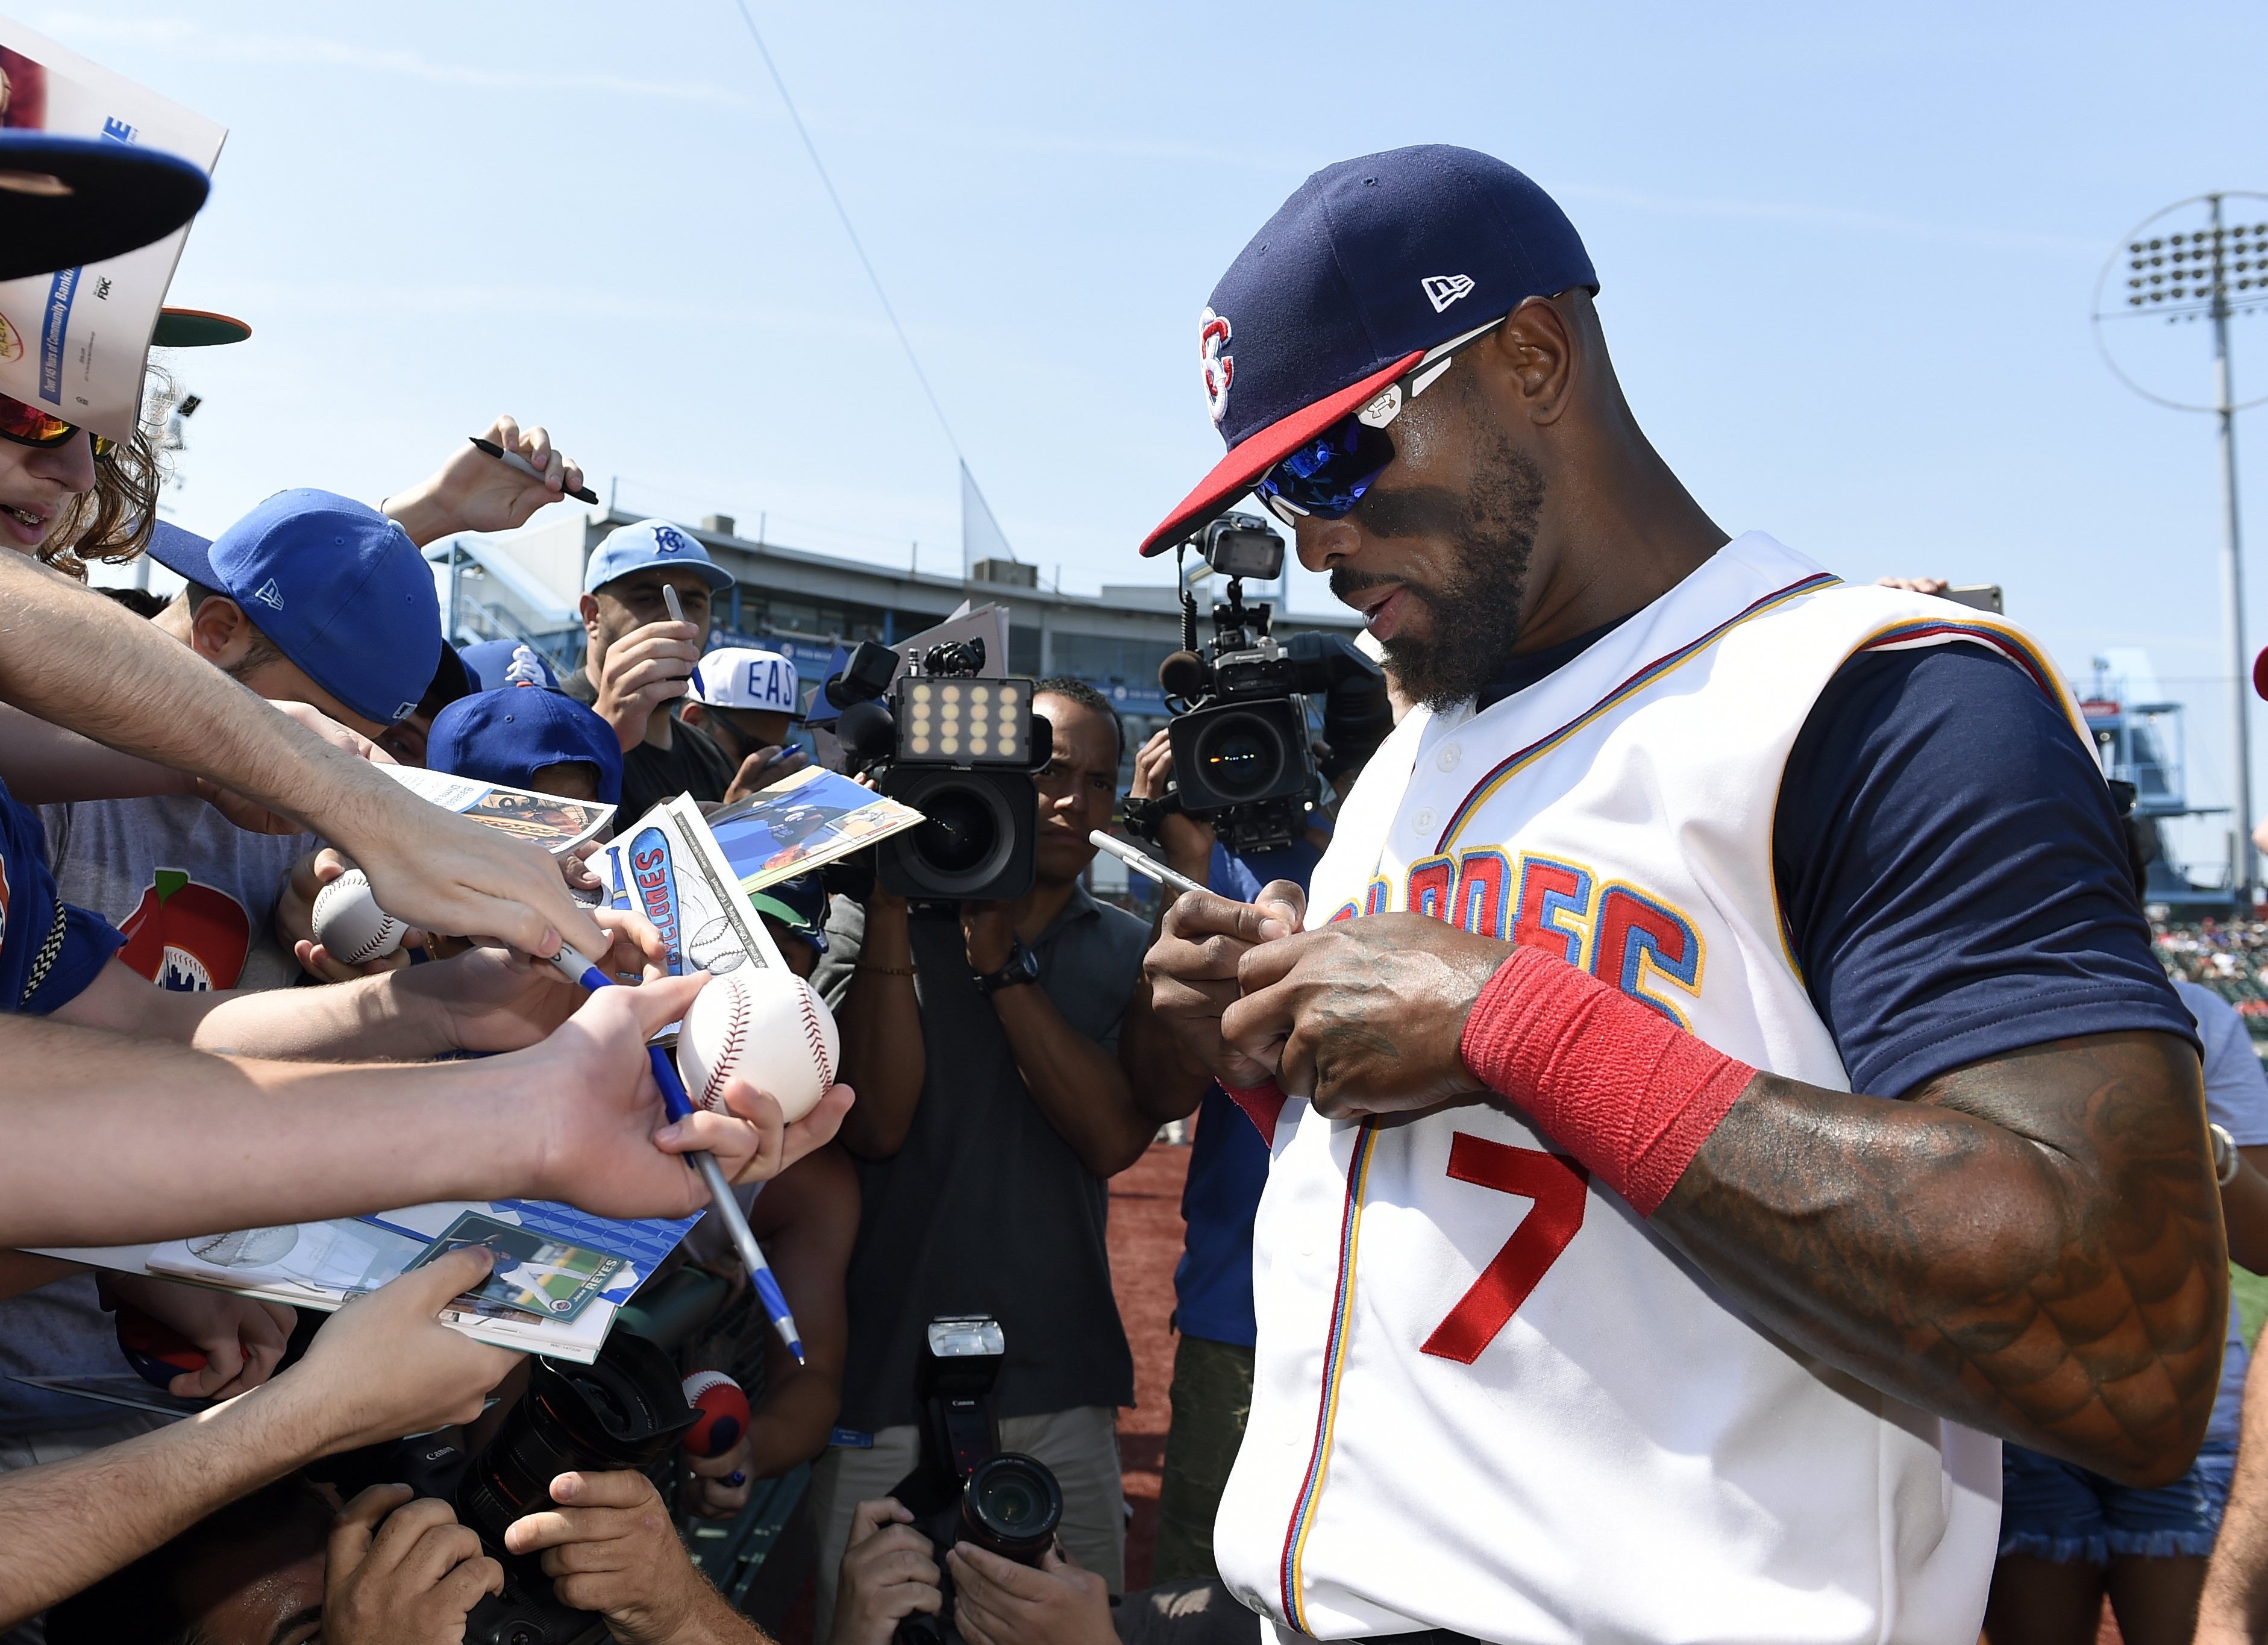 Jose Reyes, who agreed to a Minor League contract with the New York Mets, signs autographs Sunday after joining the team's affiliated Brooklyn Cyclones. The Cyclones' games are being reported by AP in an expansion of Minor League coverage. (AP Photo/Kathy Kmonicek)